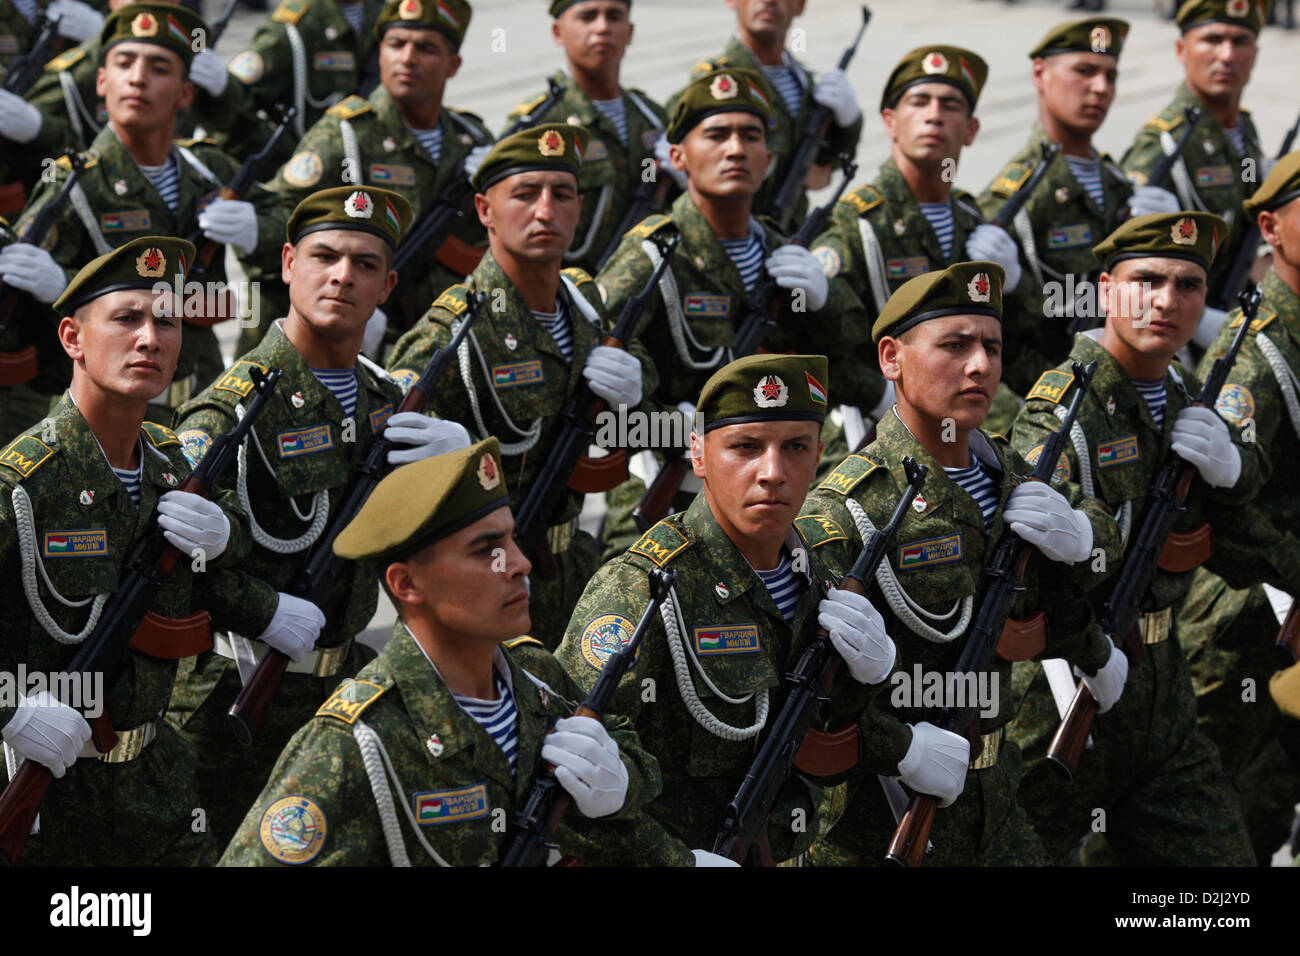 Tajik soldiers marching during an Independence day celebration in Dushanbe, Tajikistan. Stock Photo